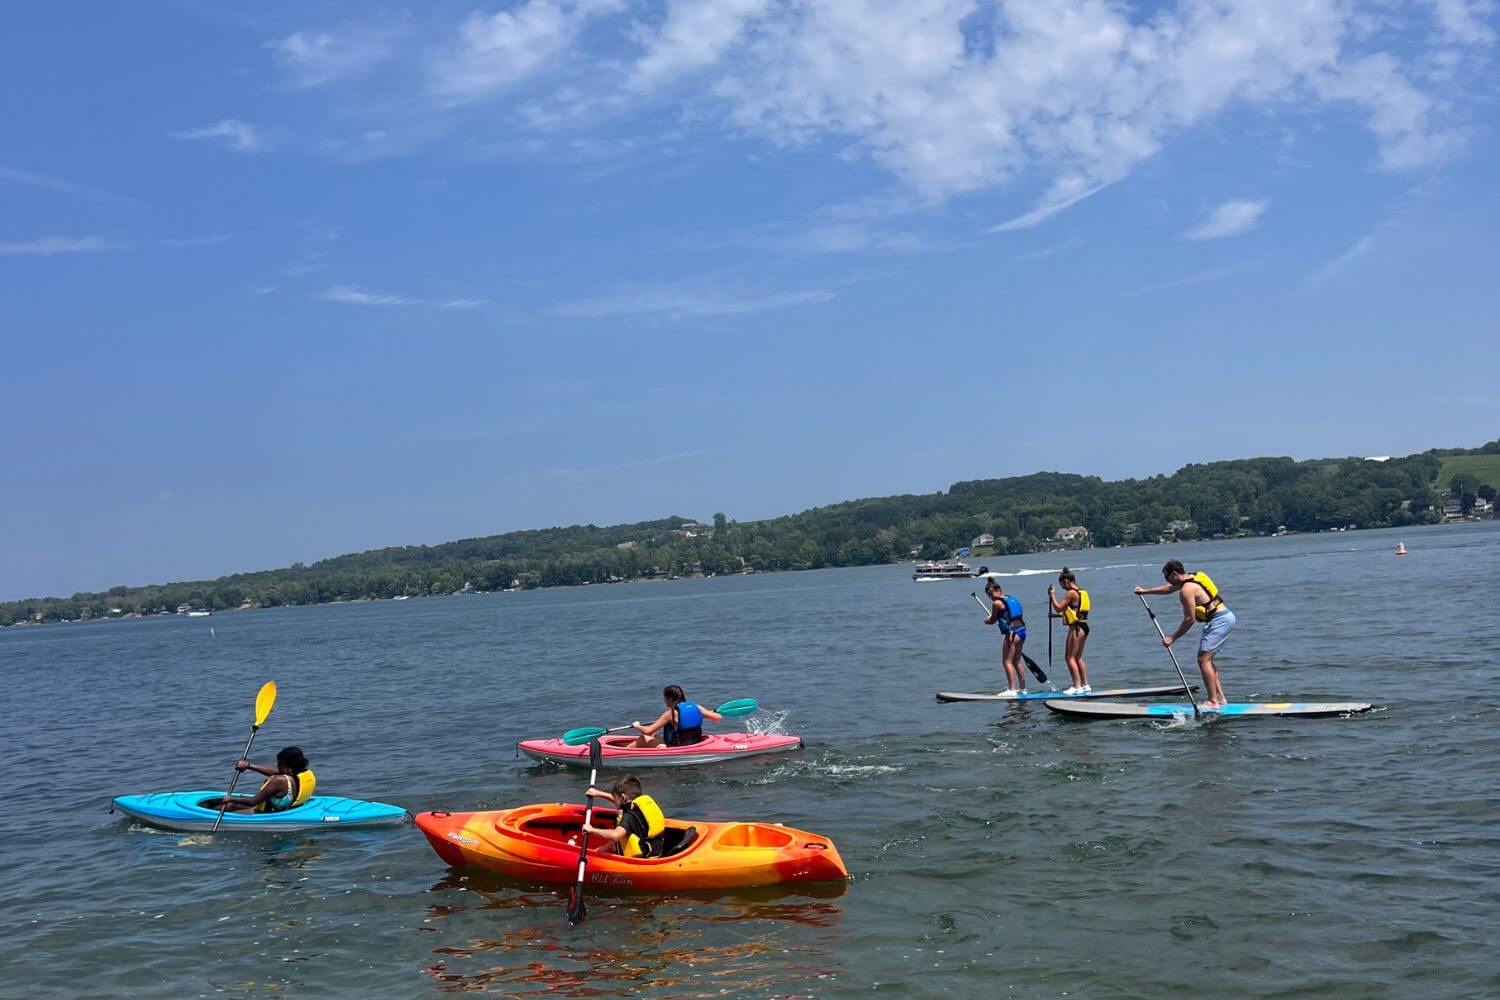 Summer campers on stand up paddleboards and kayaks having fun on the lake